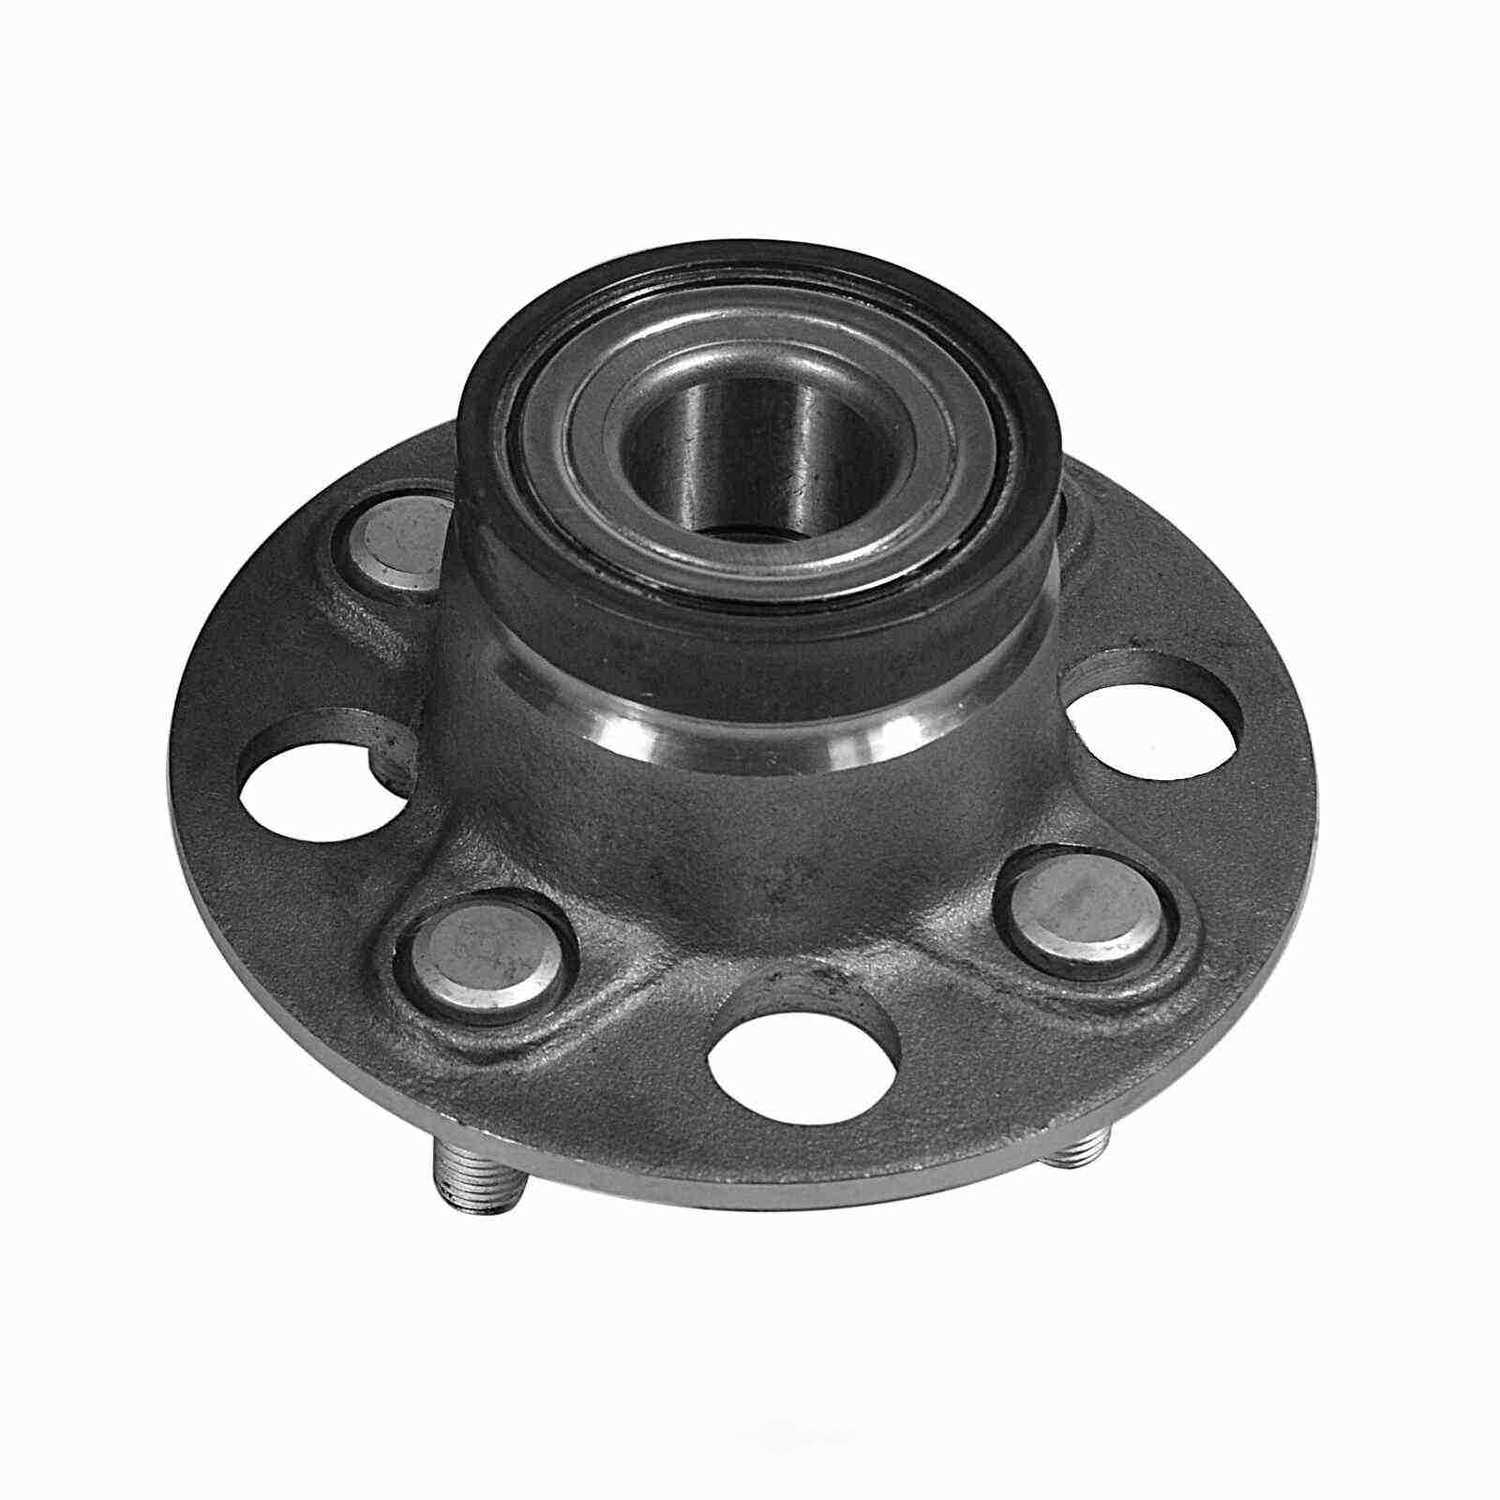 GSP NORTH AMERICA INC. - GSP New Wheel Bearing and Hub Assembly (Rear) - AD8 363323